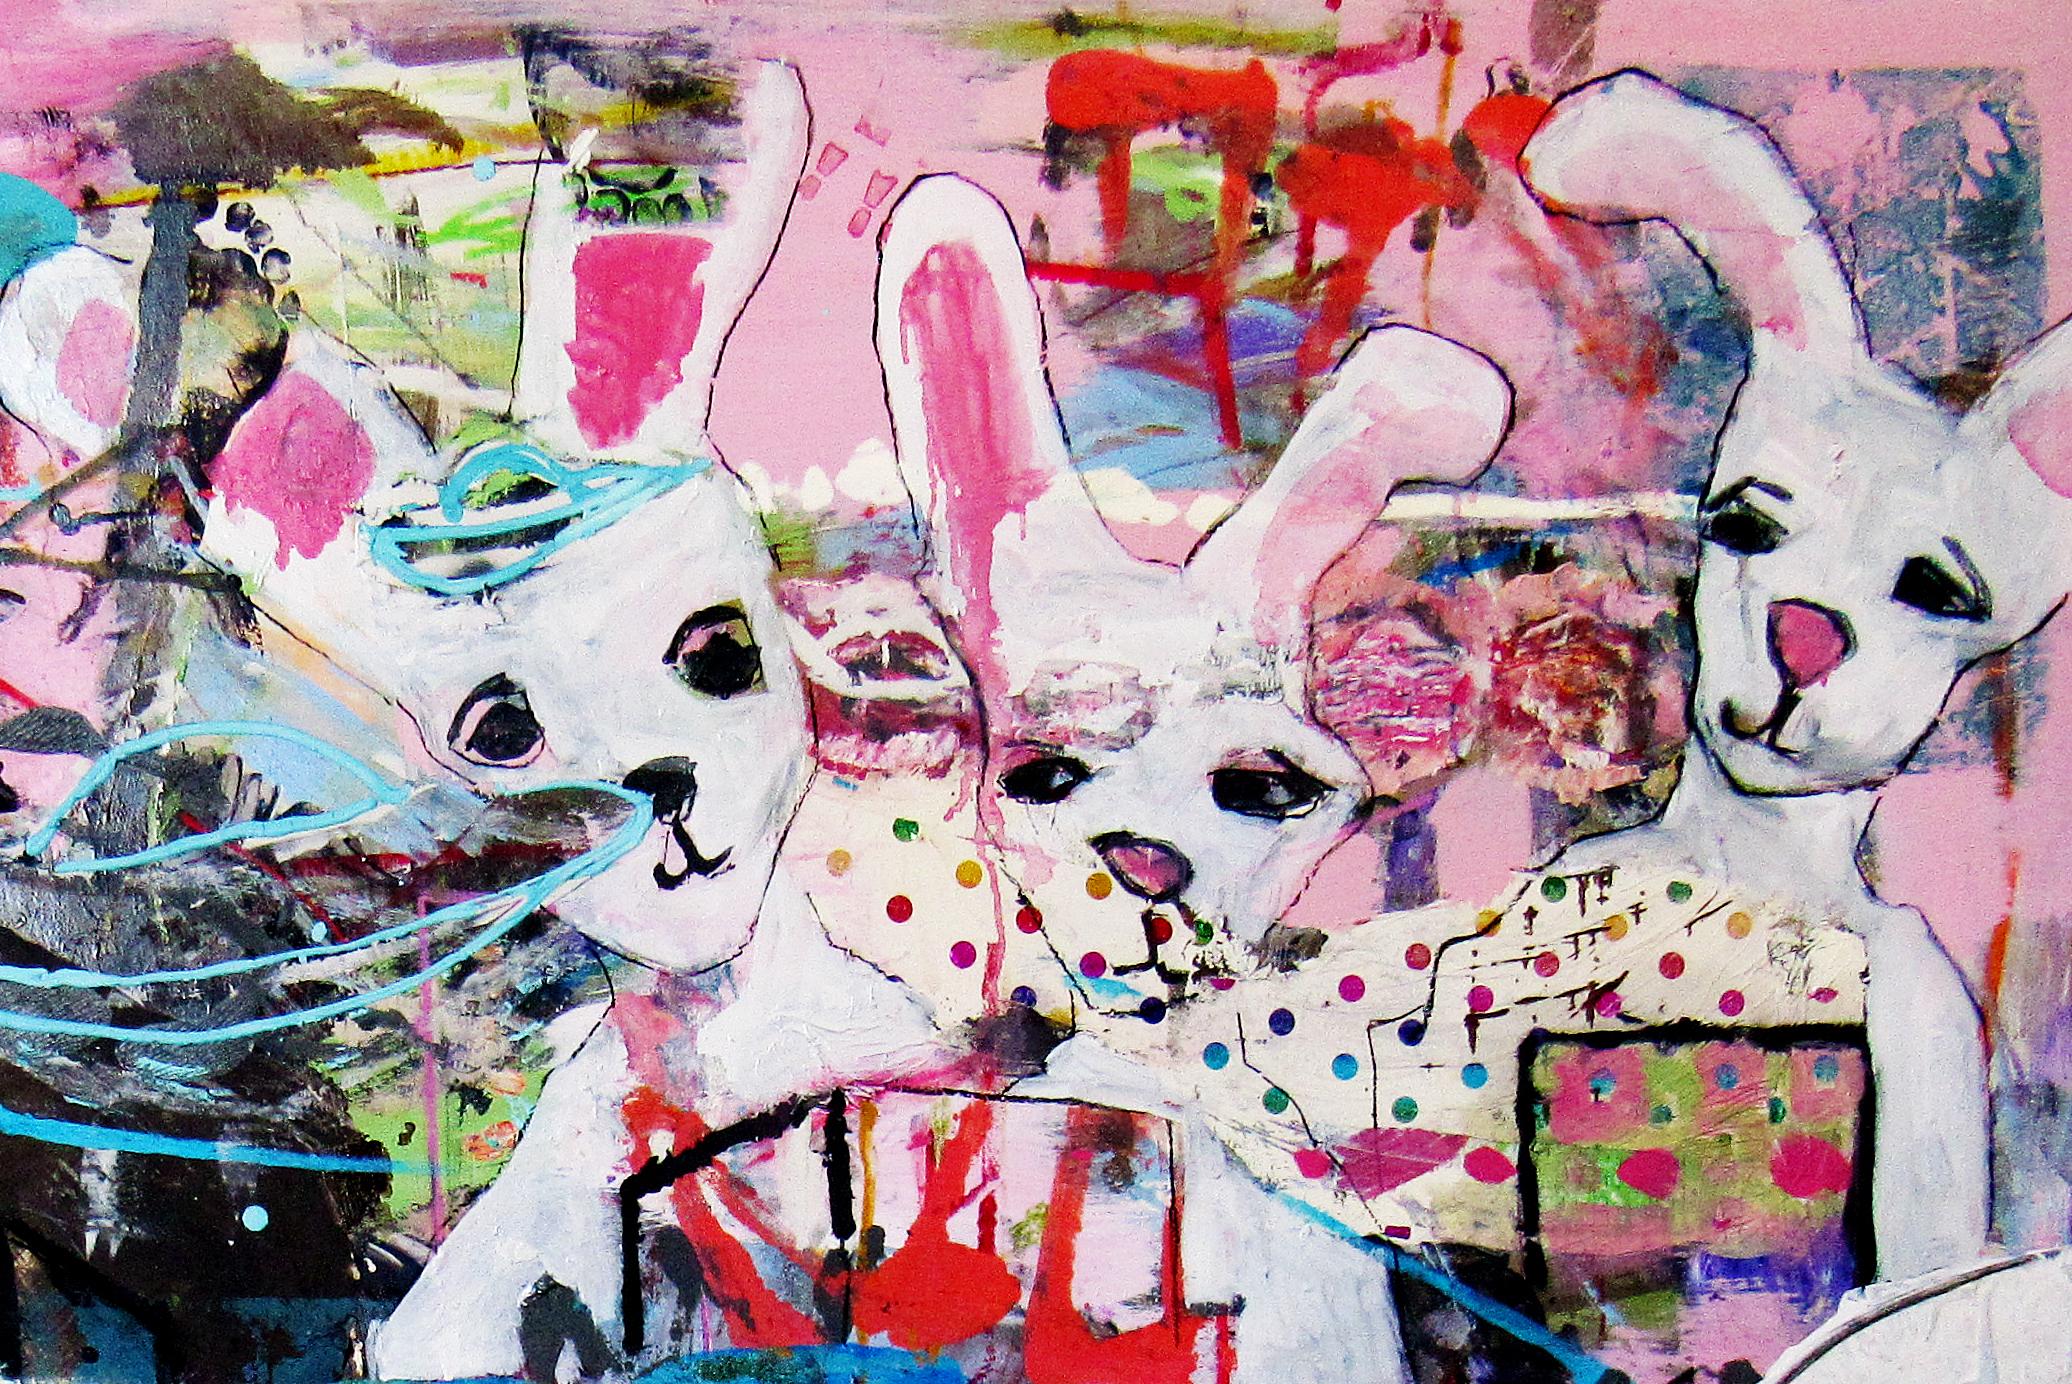 Rabbits in Rome, colorful abstract with rabbits, architecture, hot pink blue - Fauvist Painting by C. Dimitri